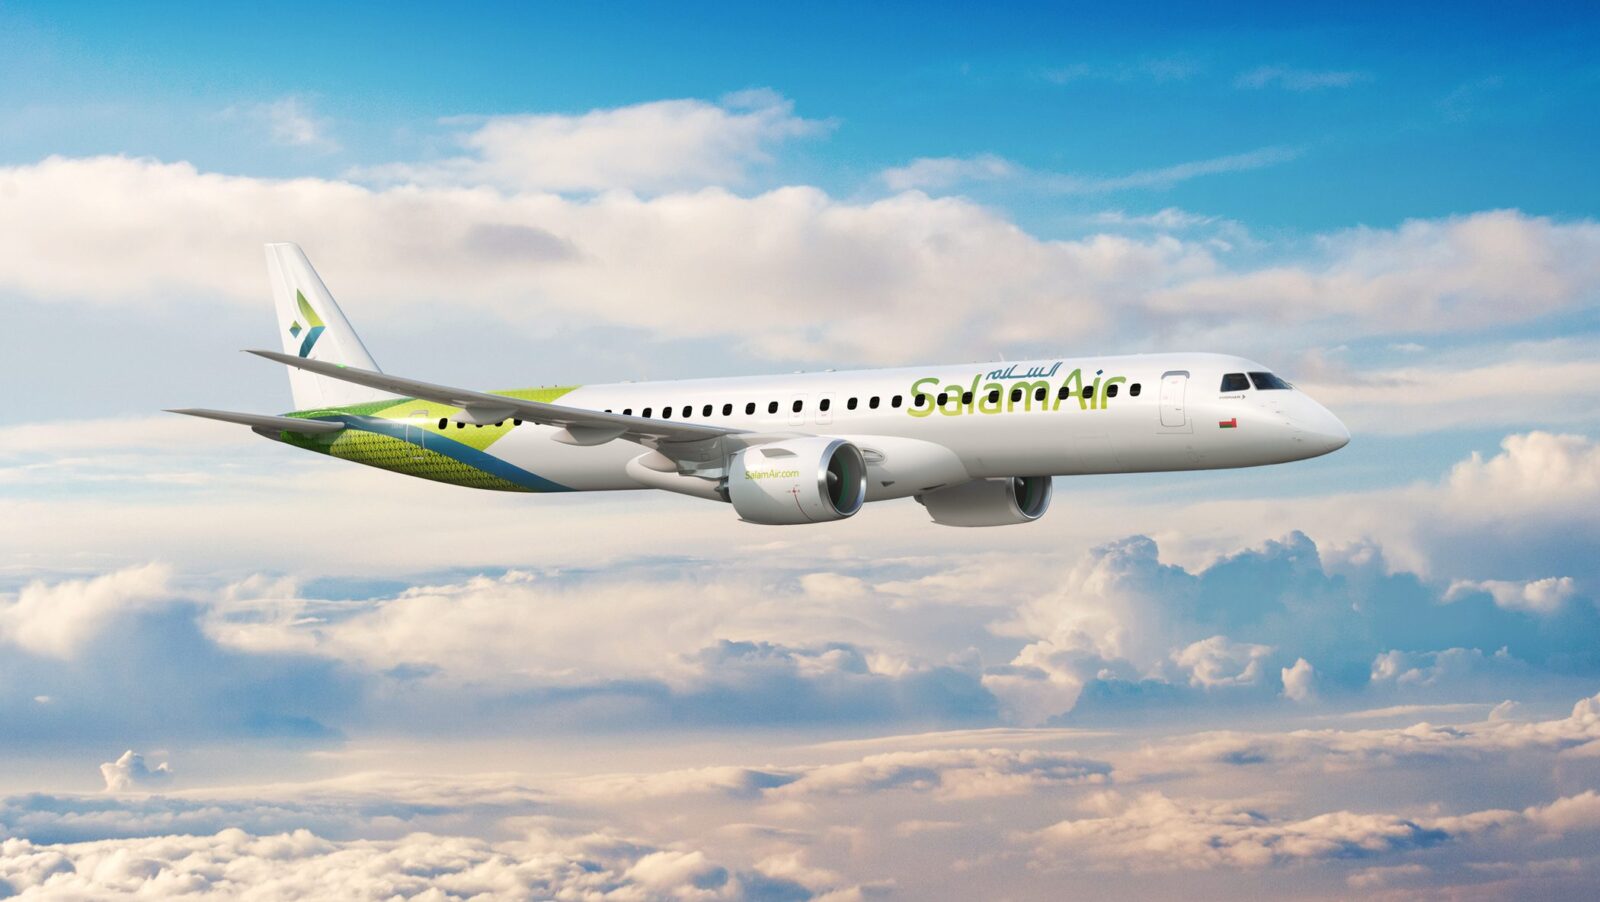 SalamAir, Oman’s Low-Cost Carrier, Selects the Embraer E195-E2 for Next Stage of Growth